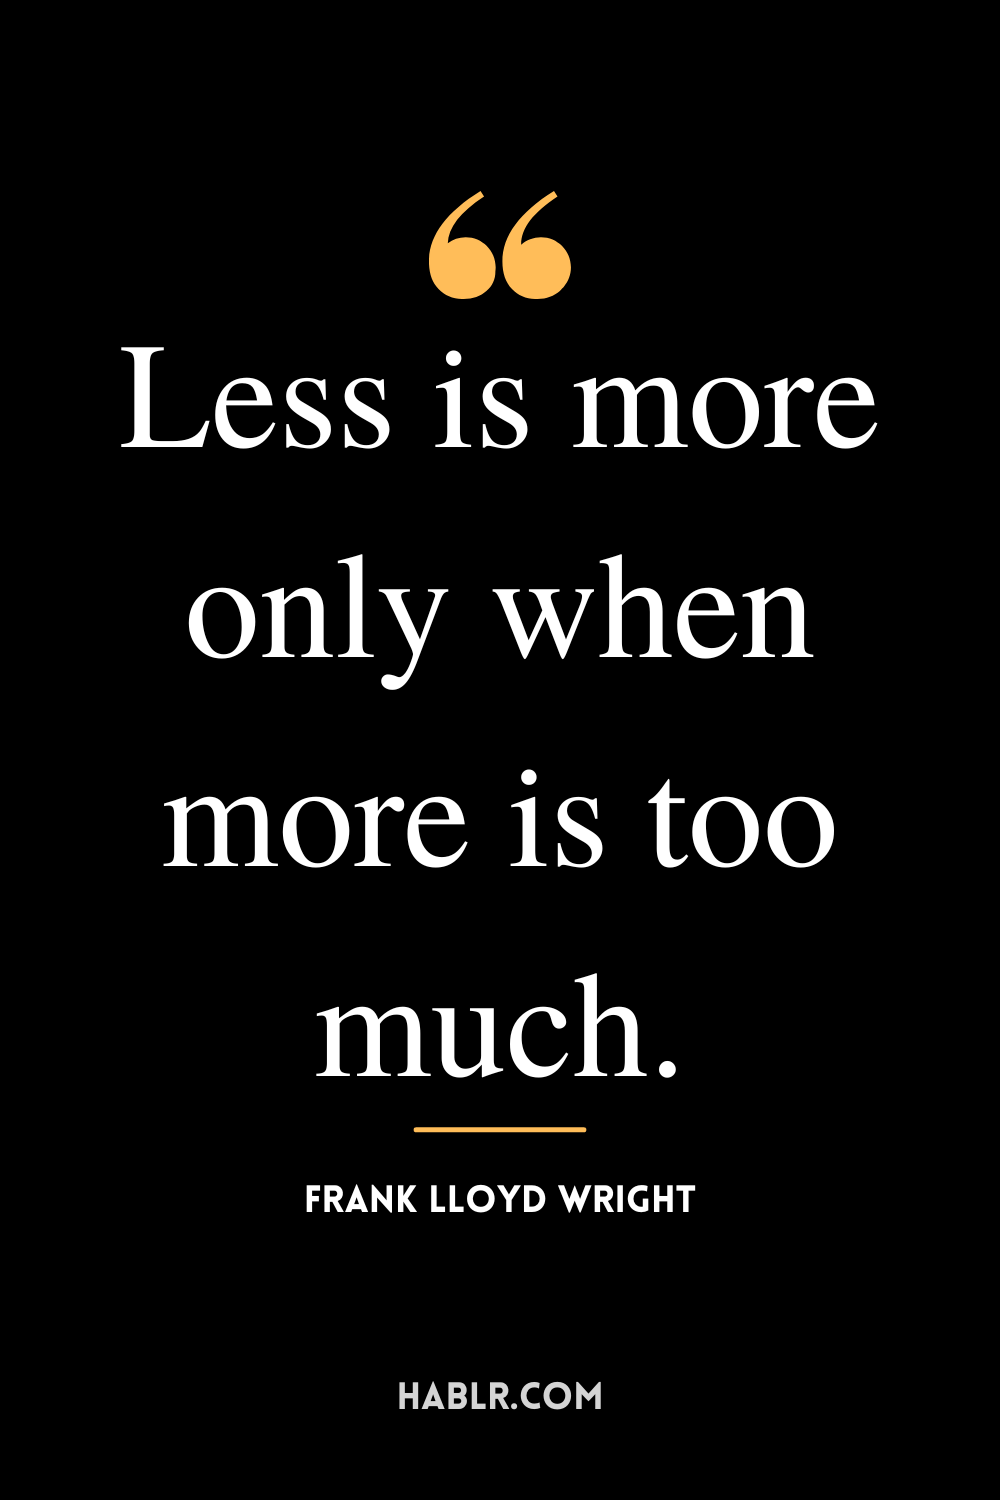 "Less is more only when more is too much." -Frank Lloyd Wright